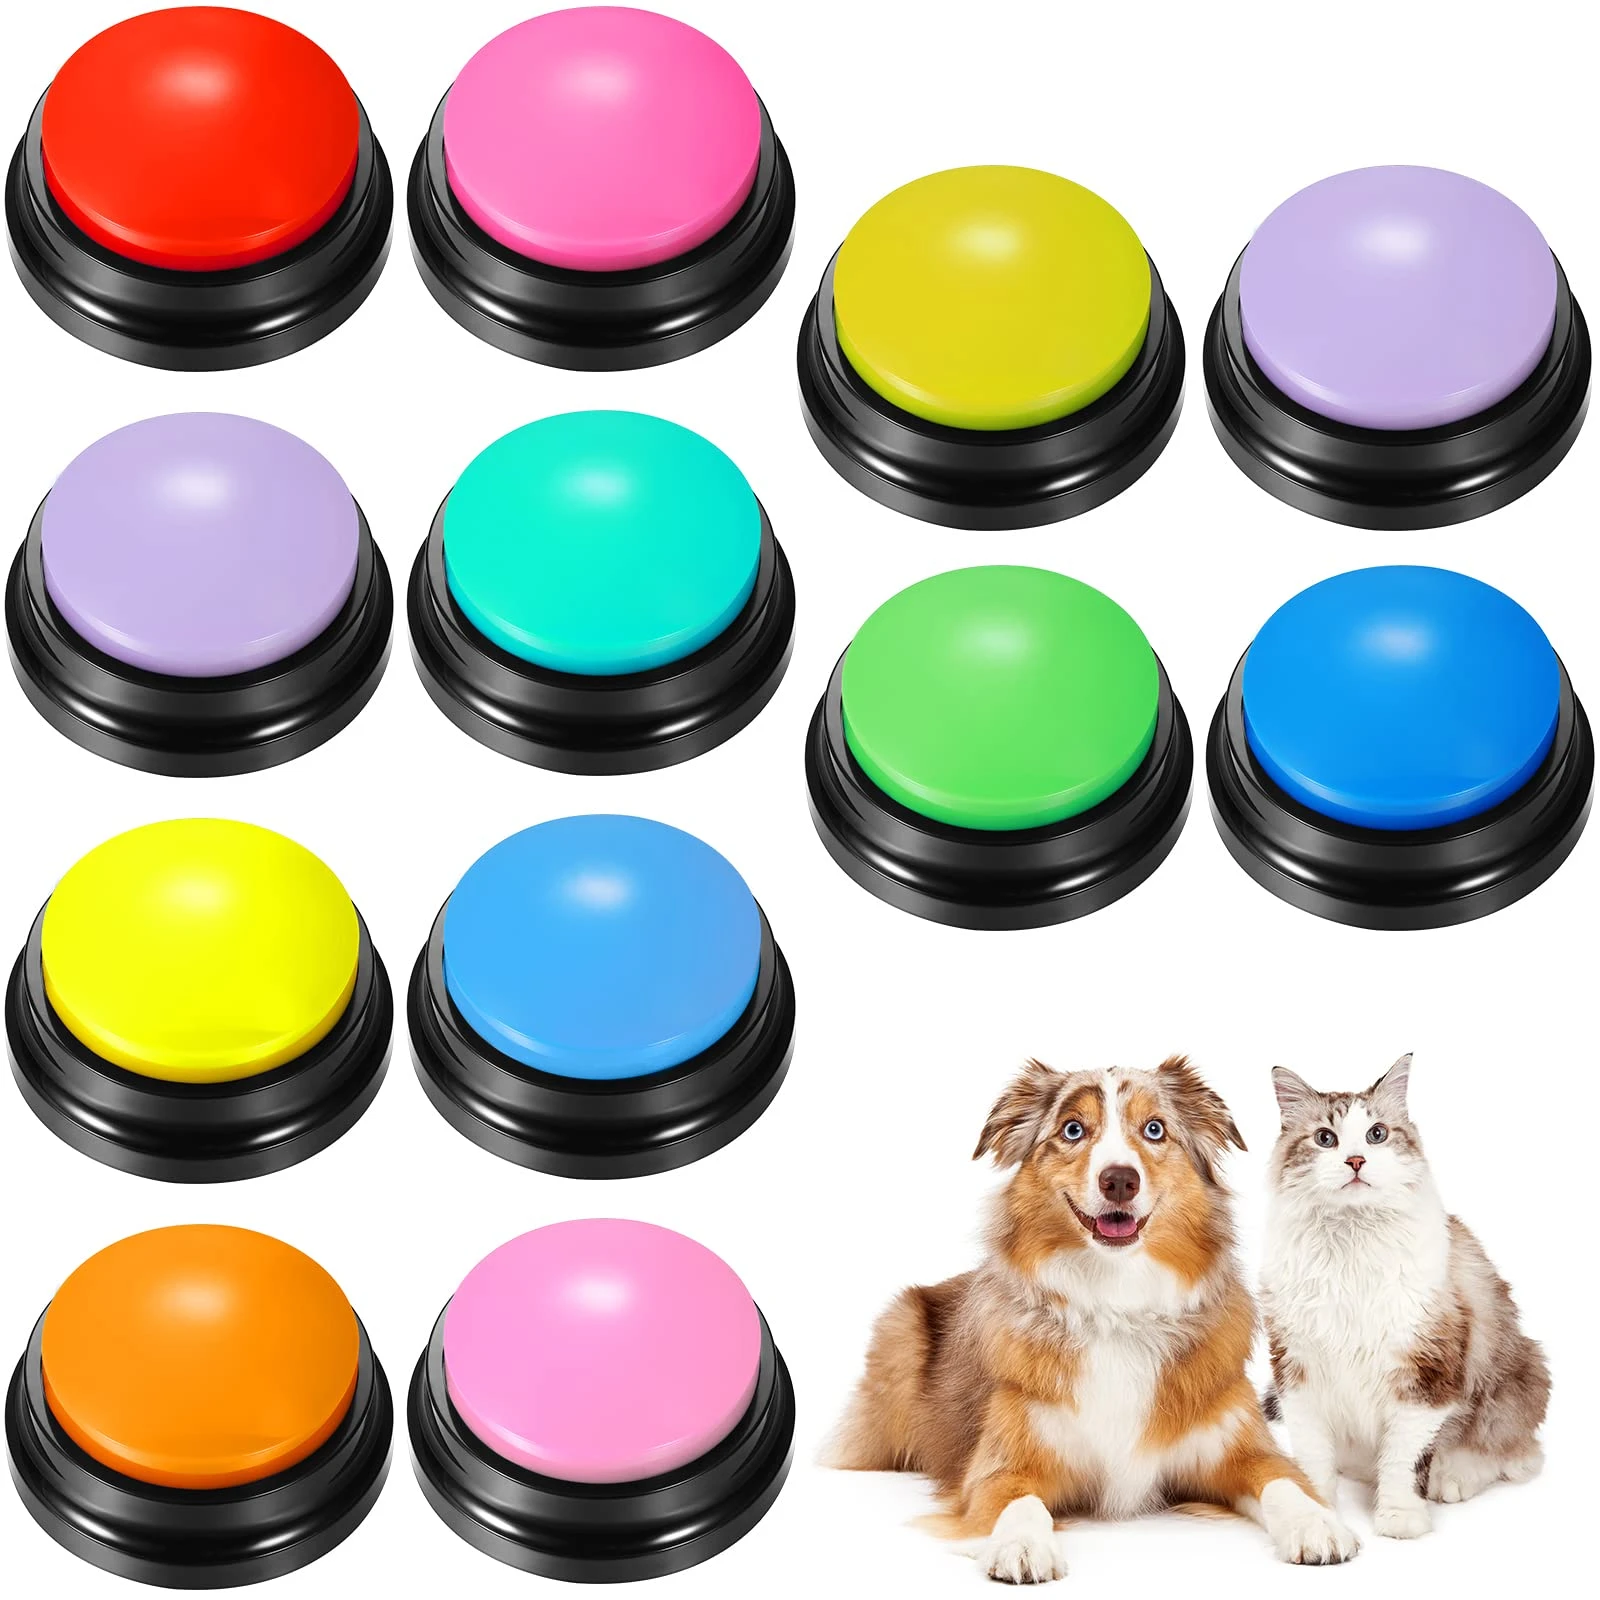 Dog Talking Buttons for Communication Record Button To Speak Buzzer Voice  Repeater Noise Makers Party Toys Answering Game| | - AliExpress